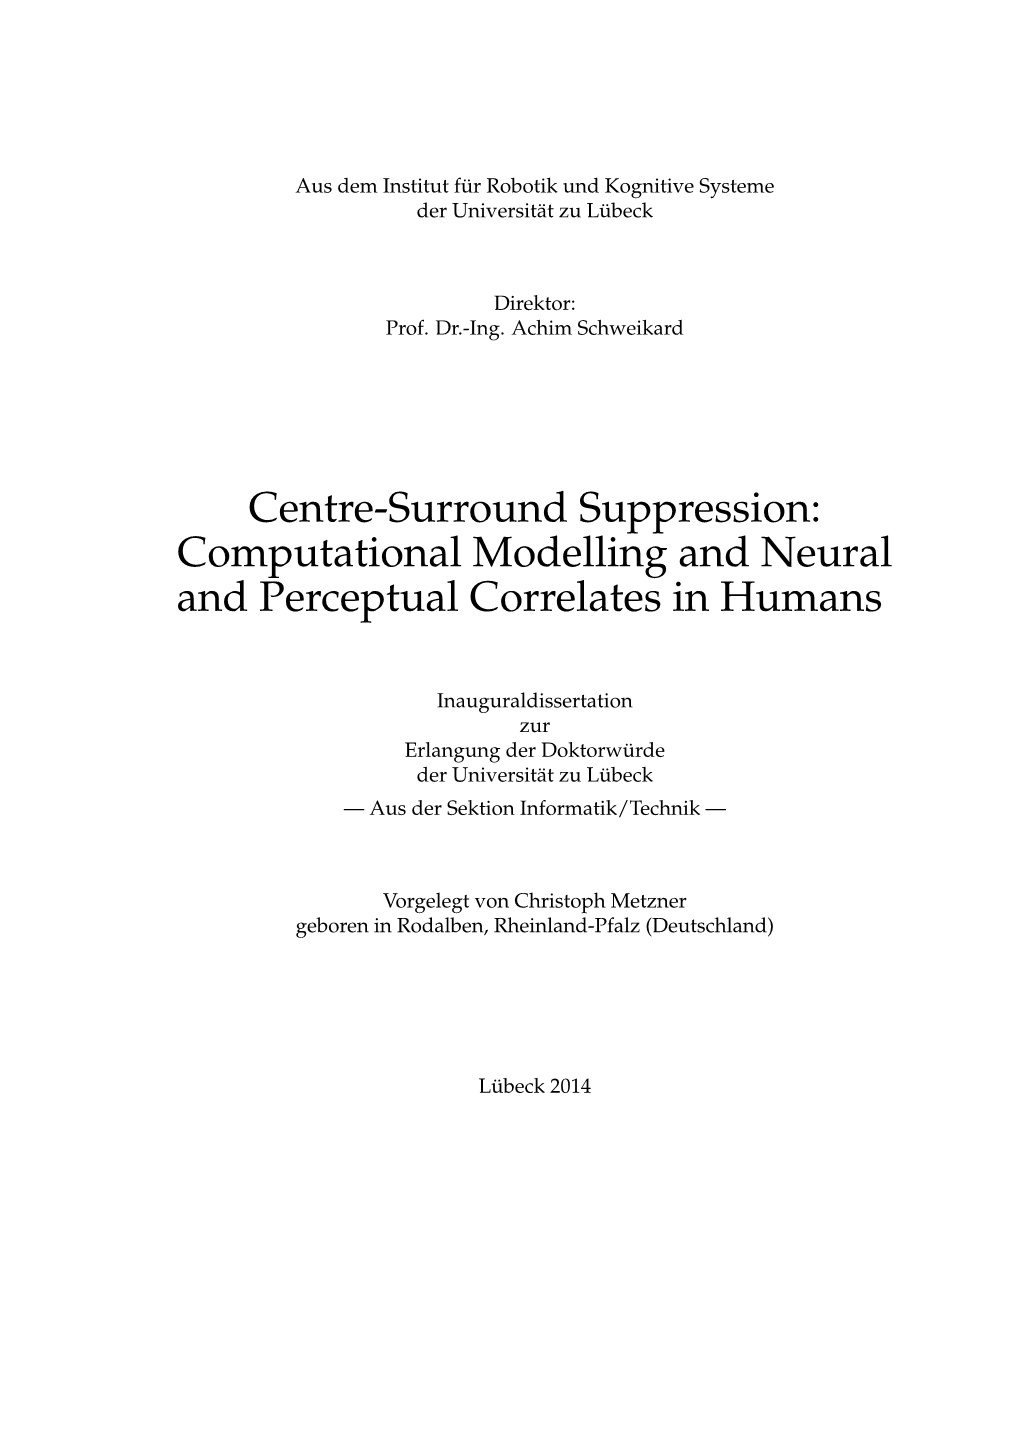 Centre-Surround Suppression: Computational Modelling and Neural and Perceptual Correlates in Humans